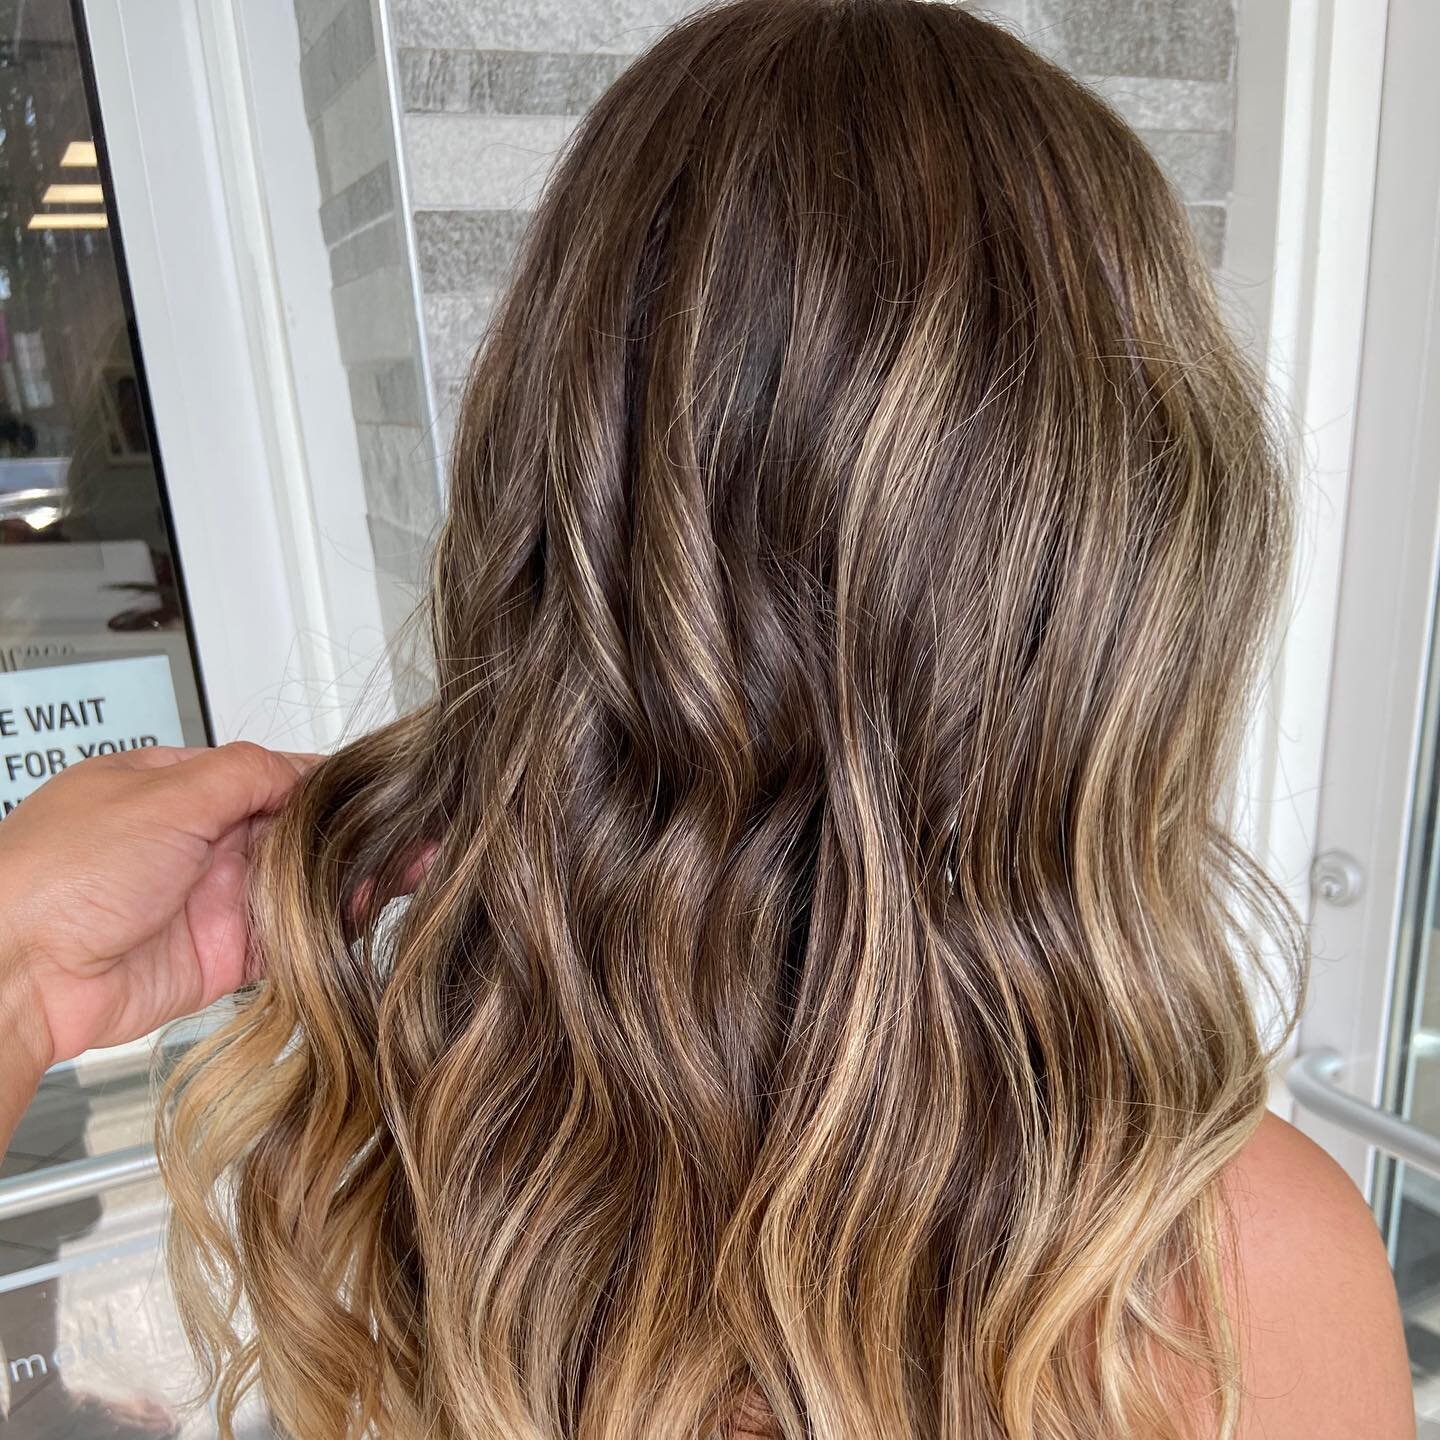 #hairgoals ! 
I am LOVING  this gorgeous honey blonde ! 
What color are going for this summer ?